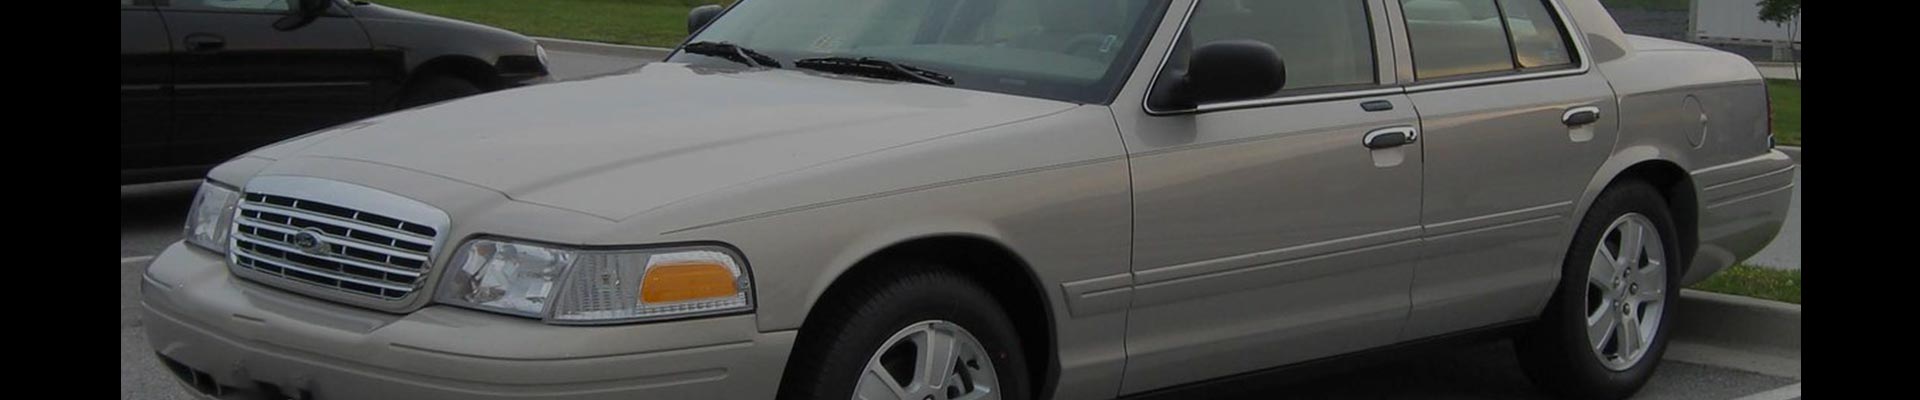 Shop Replacement and OEM 1999 Ford Crown Victoria Parts with Discounted Price on the Net